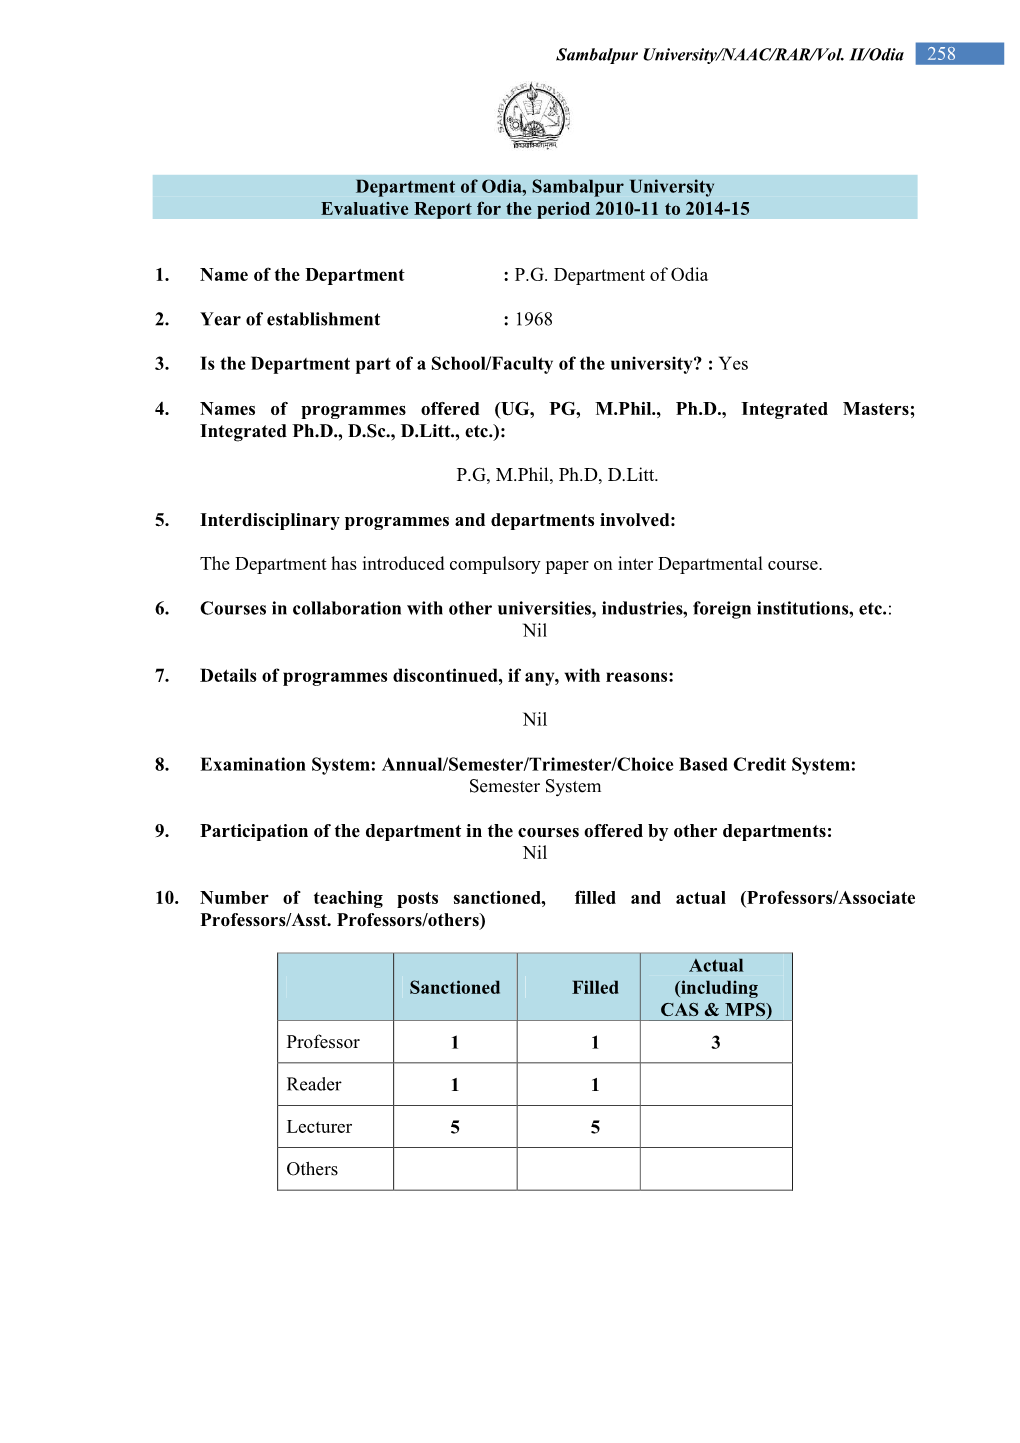 Department of Odia, Sambalpur University Evaluative Report for the Period 2010-11 to 2014-15